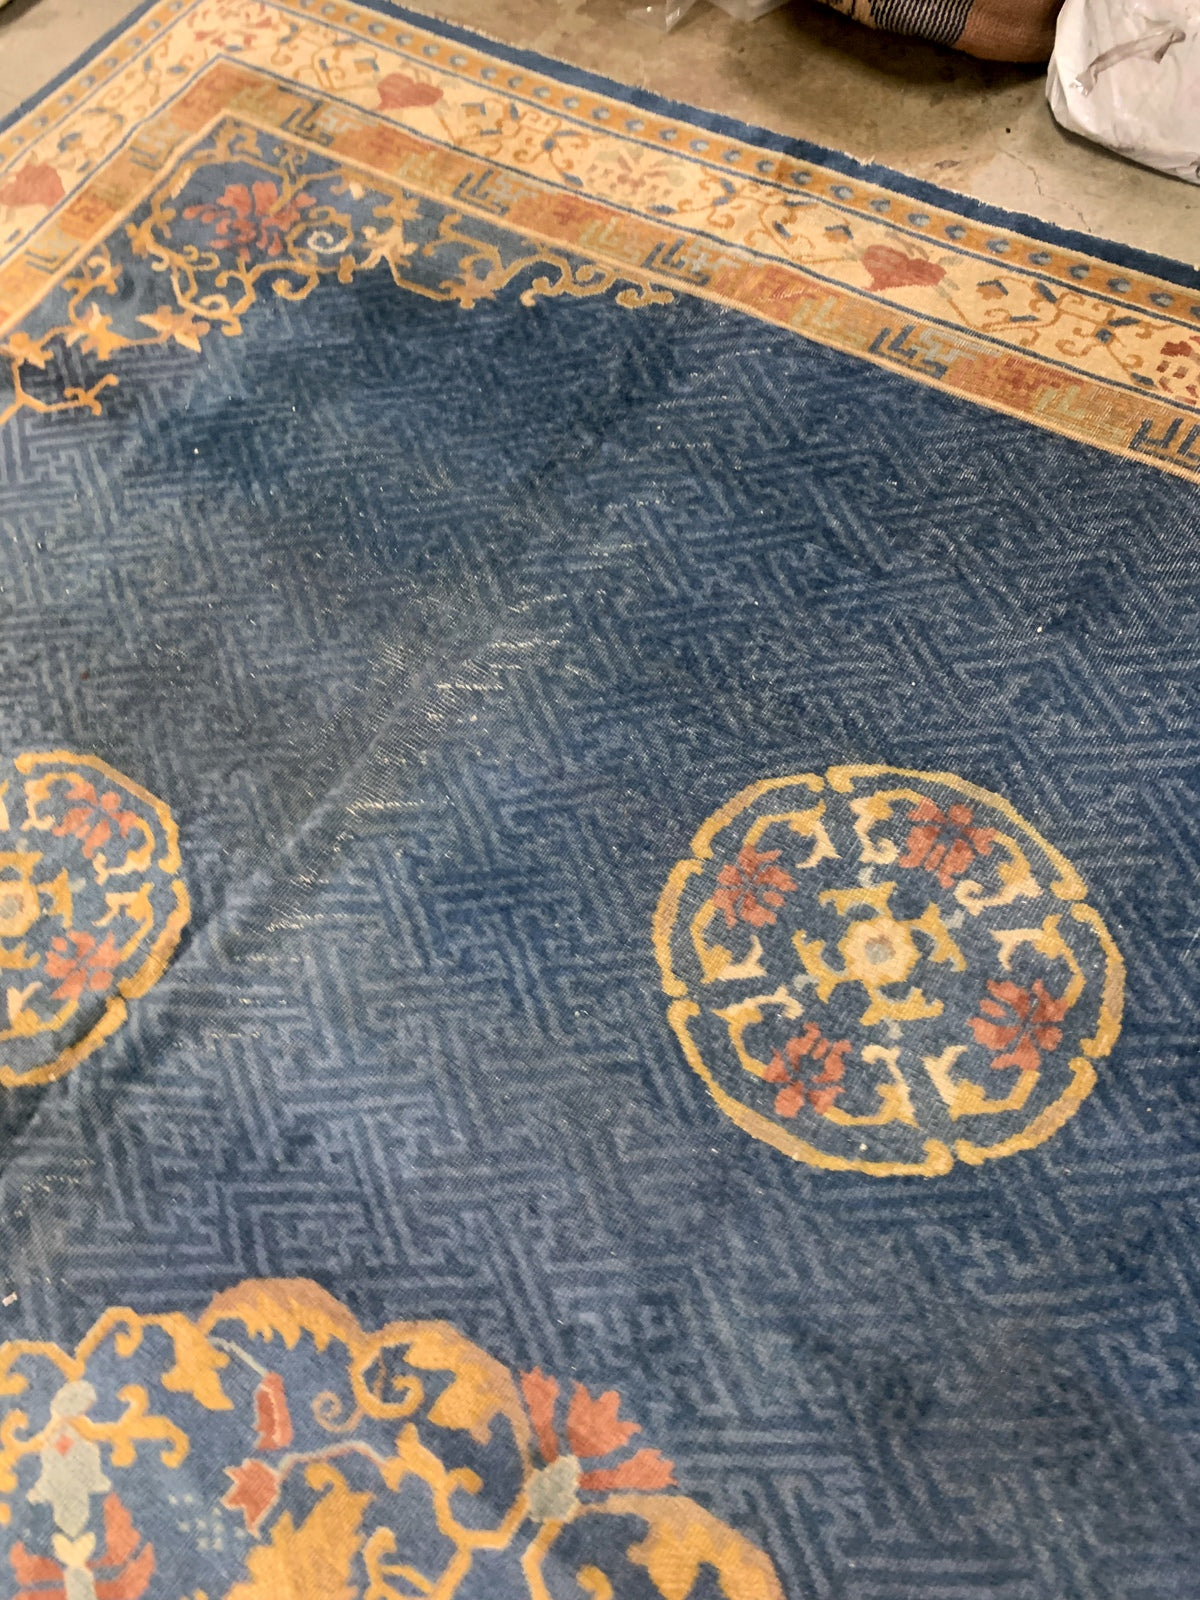 Handmade antique Peking Chinese rug in blue and beige colors. The rug is from the beginning of 20th century in original condition, it has some distressed areas.